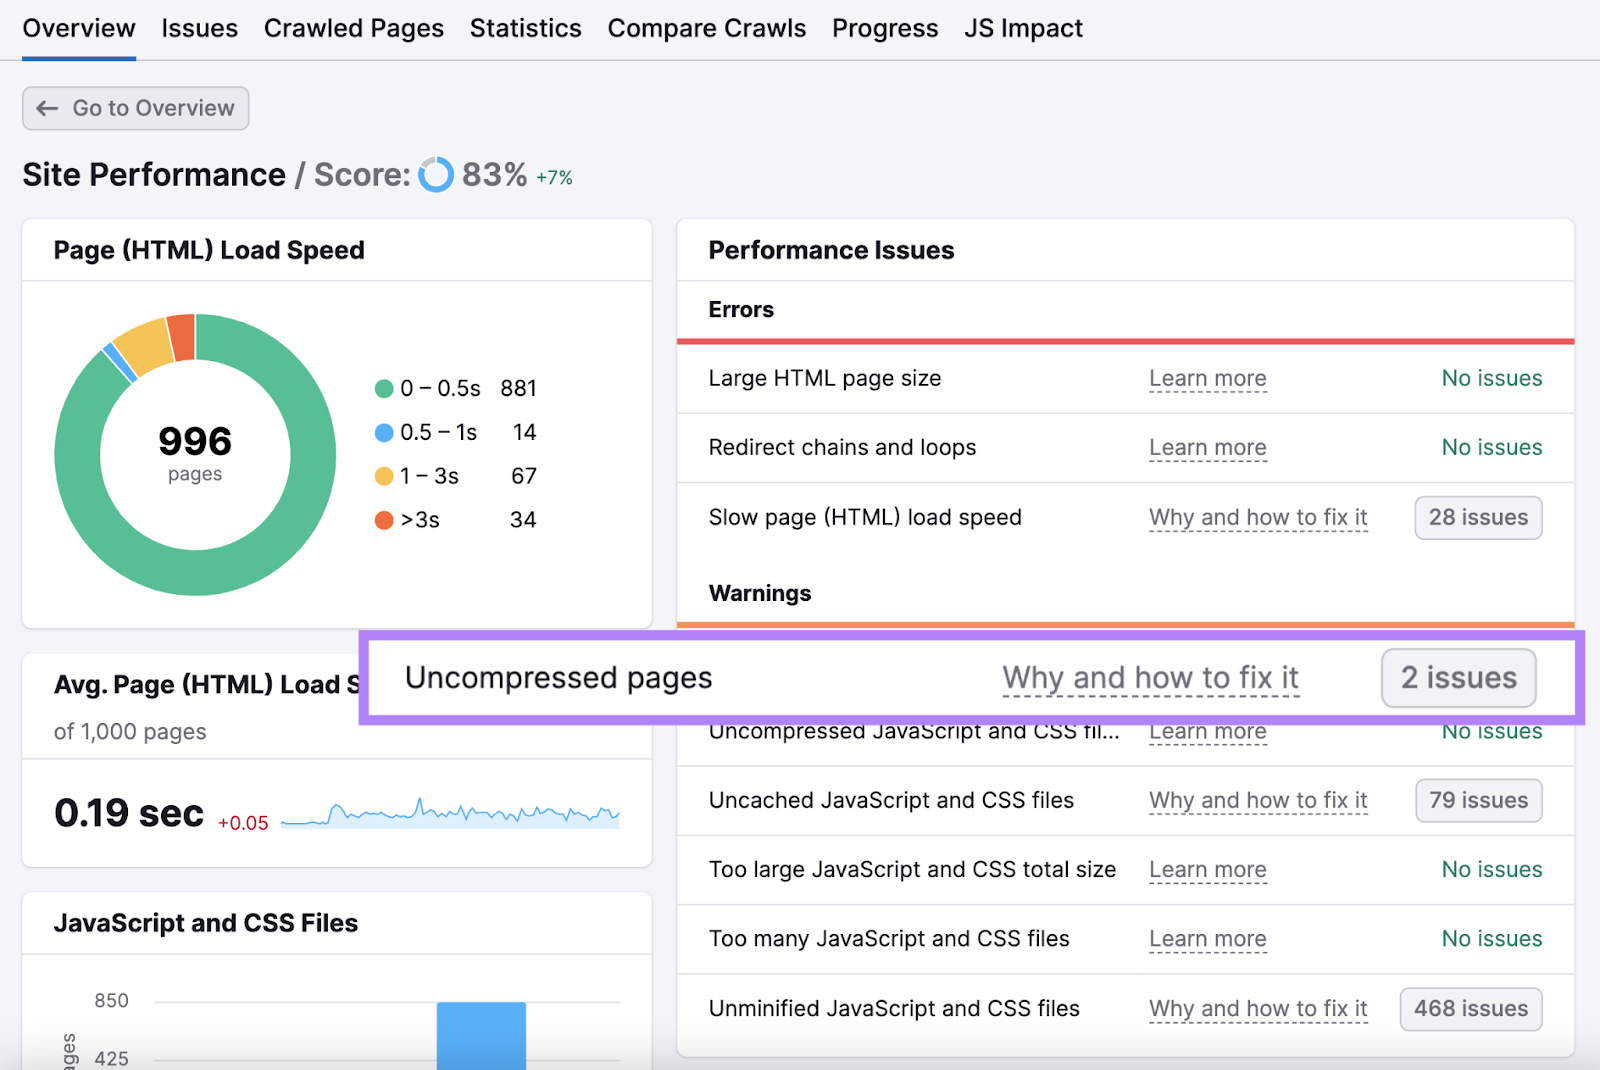 "Uncompressed pages" contented   recovered  successful  Site Audit highlighted